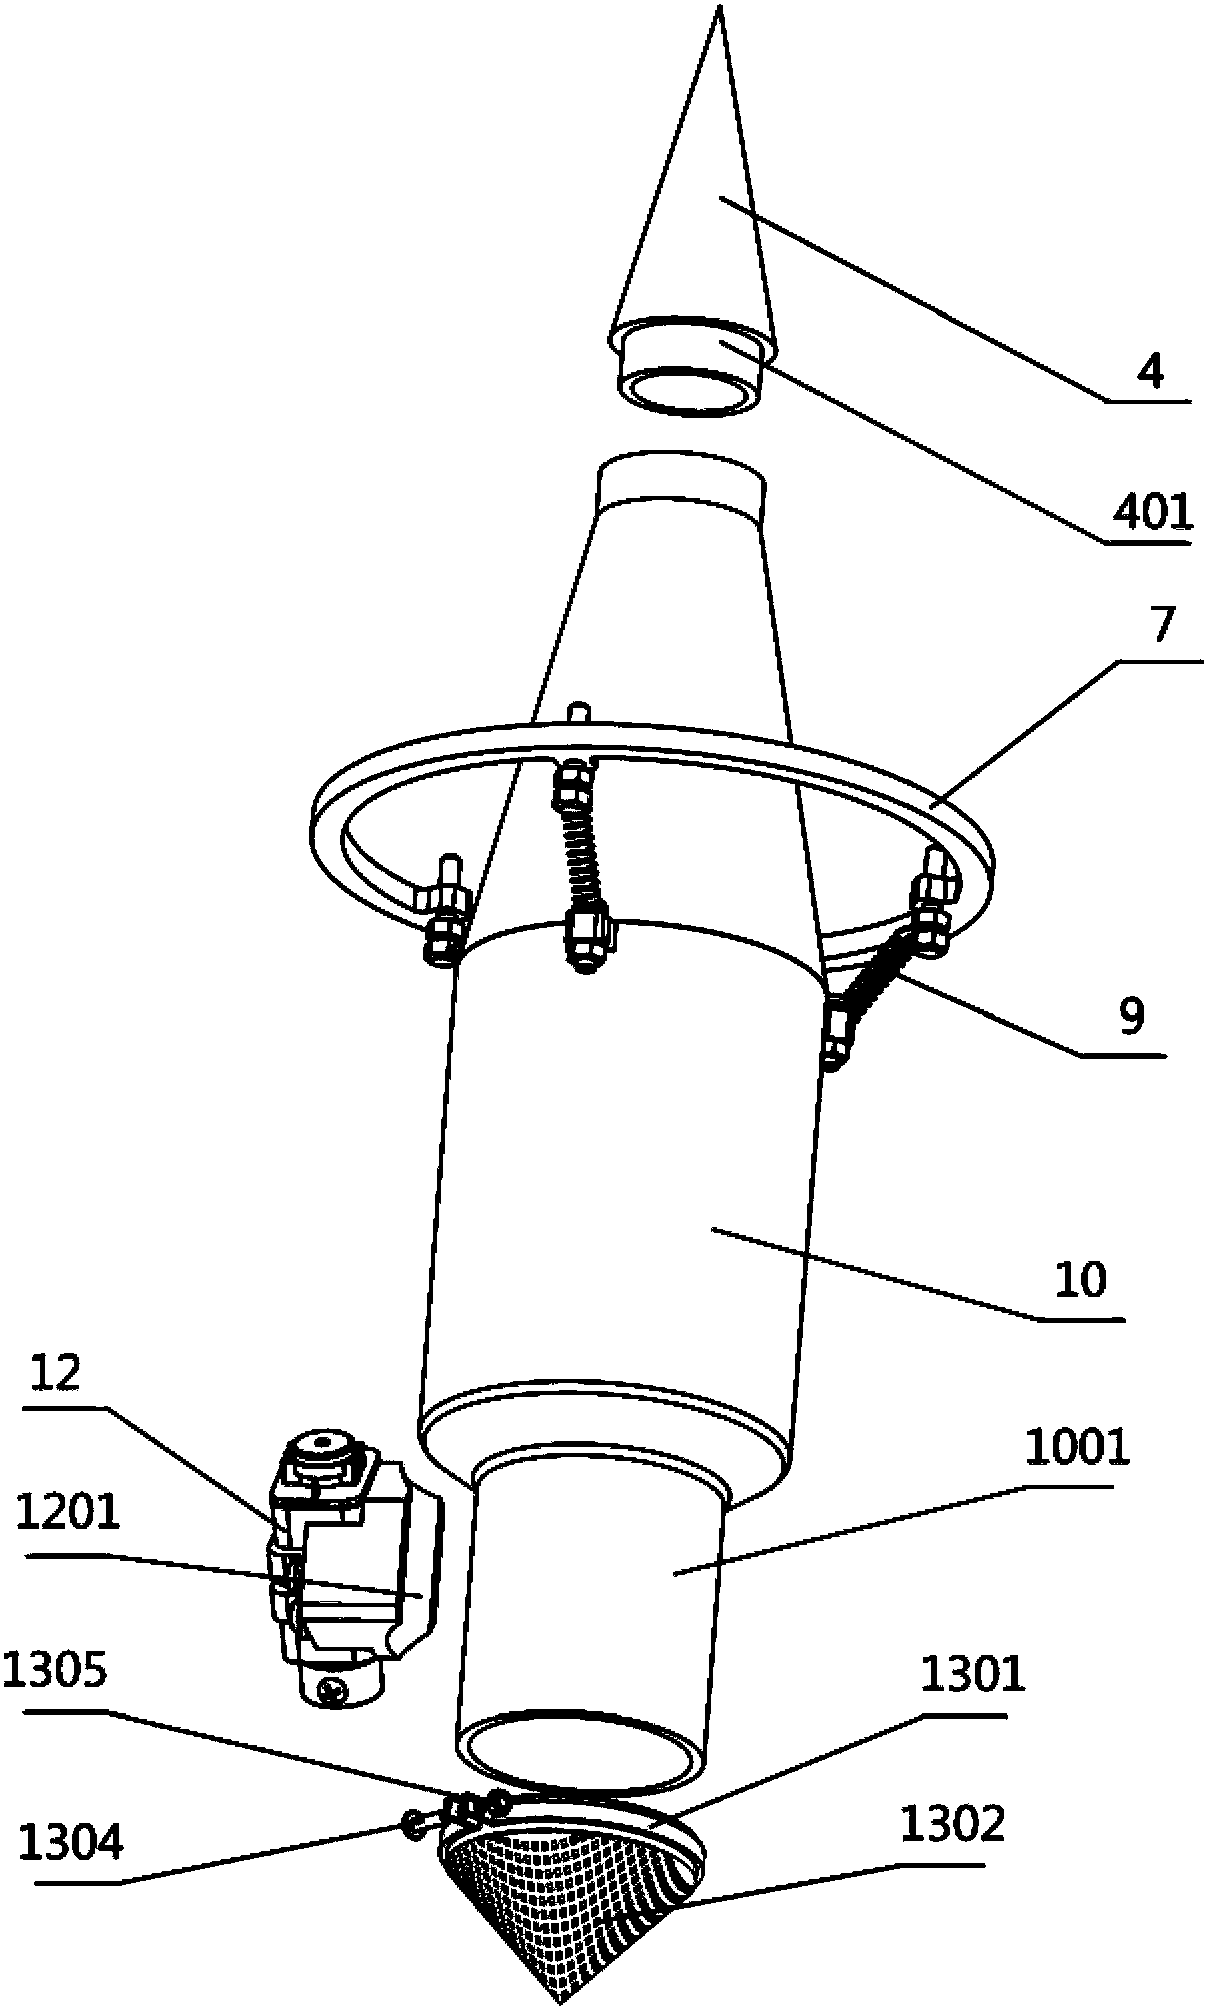 Device for generating gas-nanoparticle two-phase uniform fluid